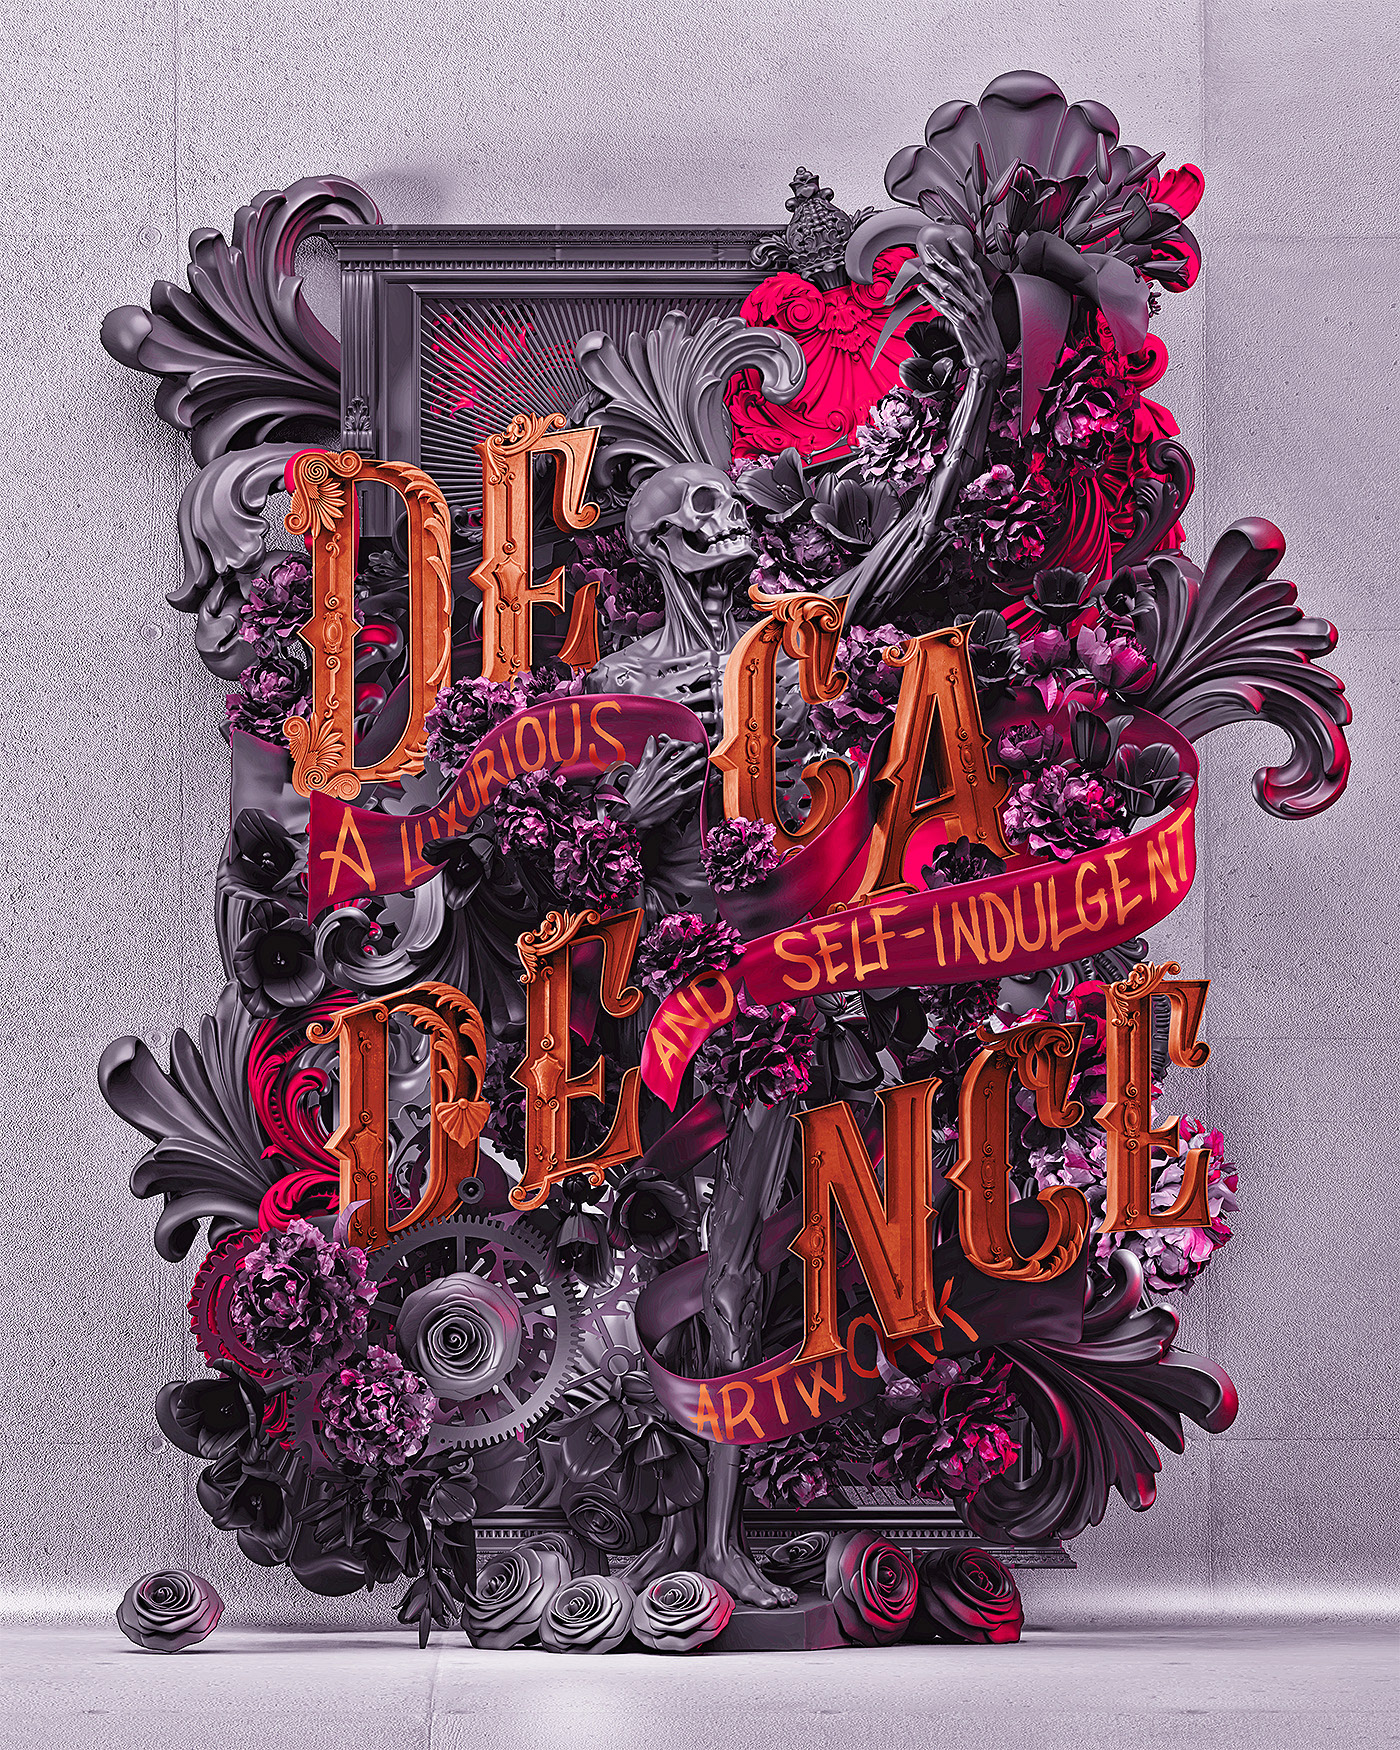 Decadence skull STEAMPUNK 3D typography Layout details